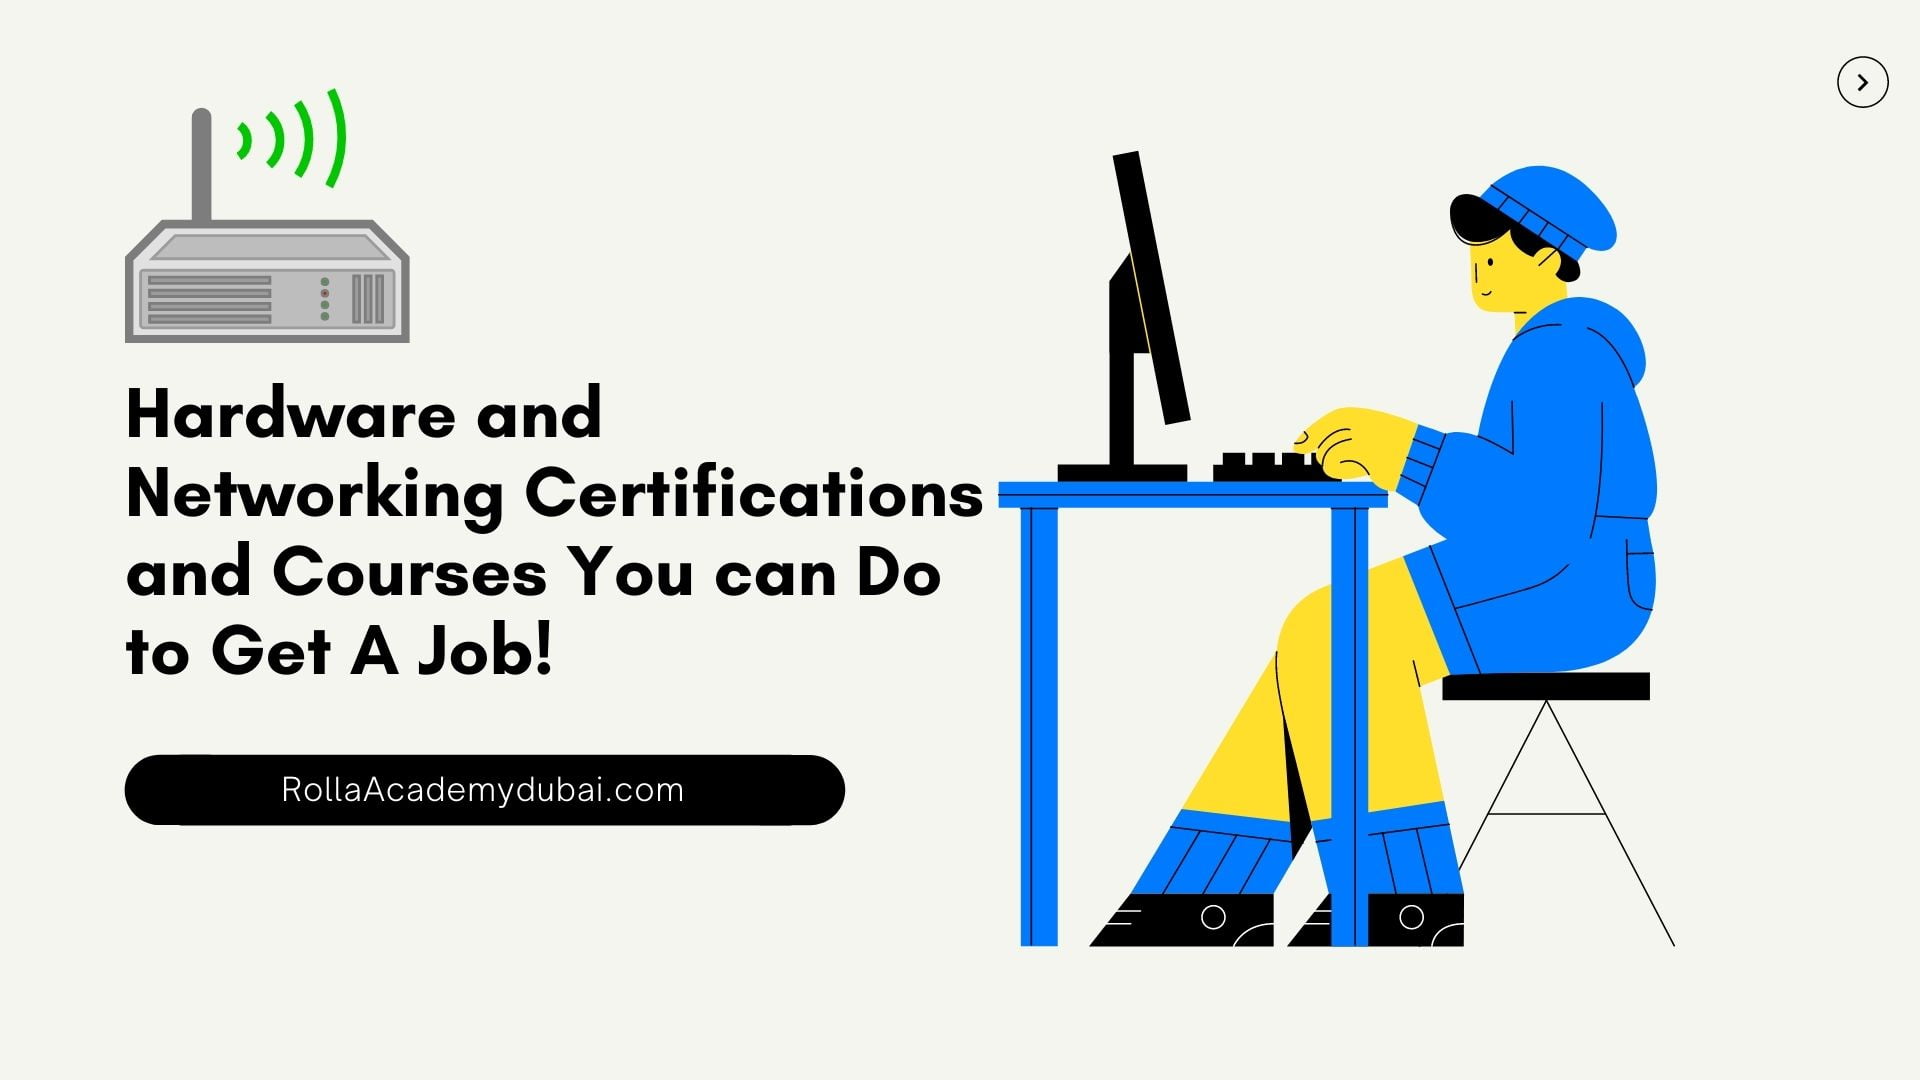 Hardware and Networking Certifications and Courses You can Do to Get A job